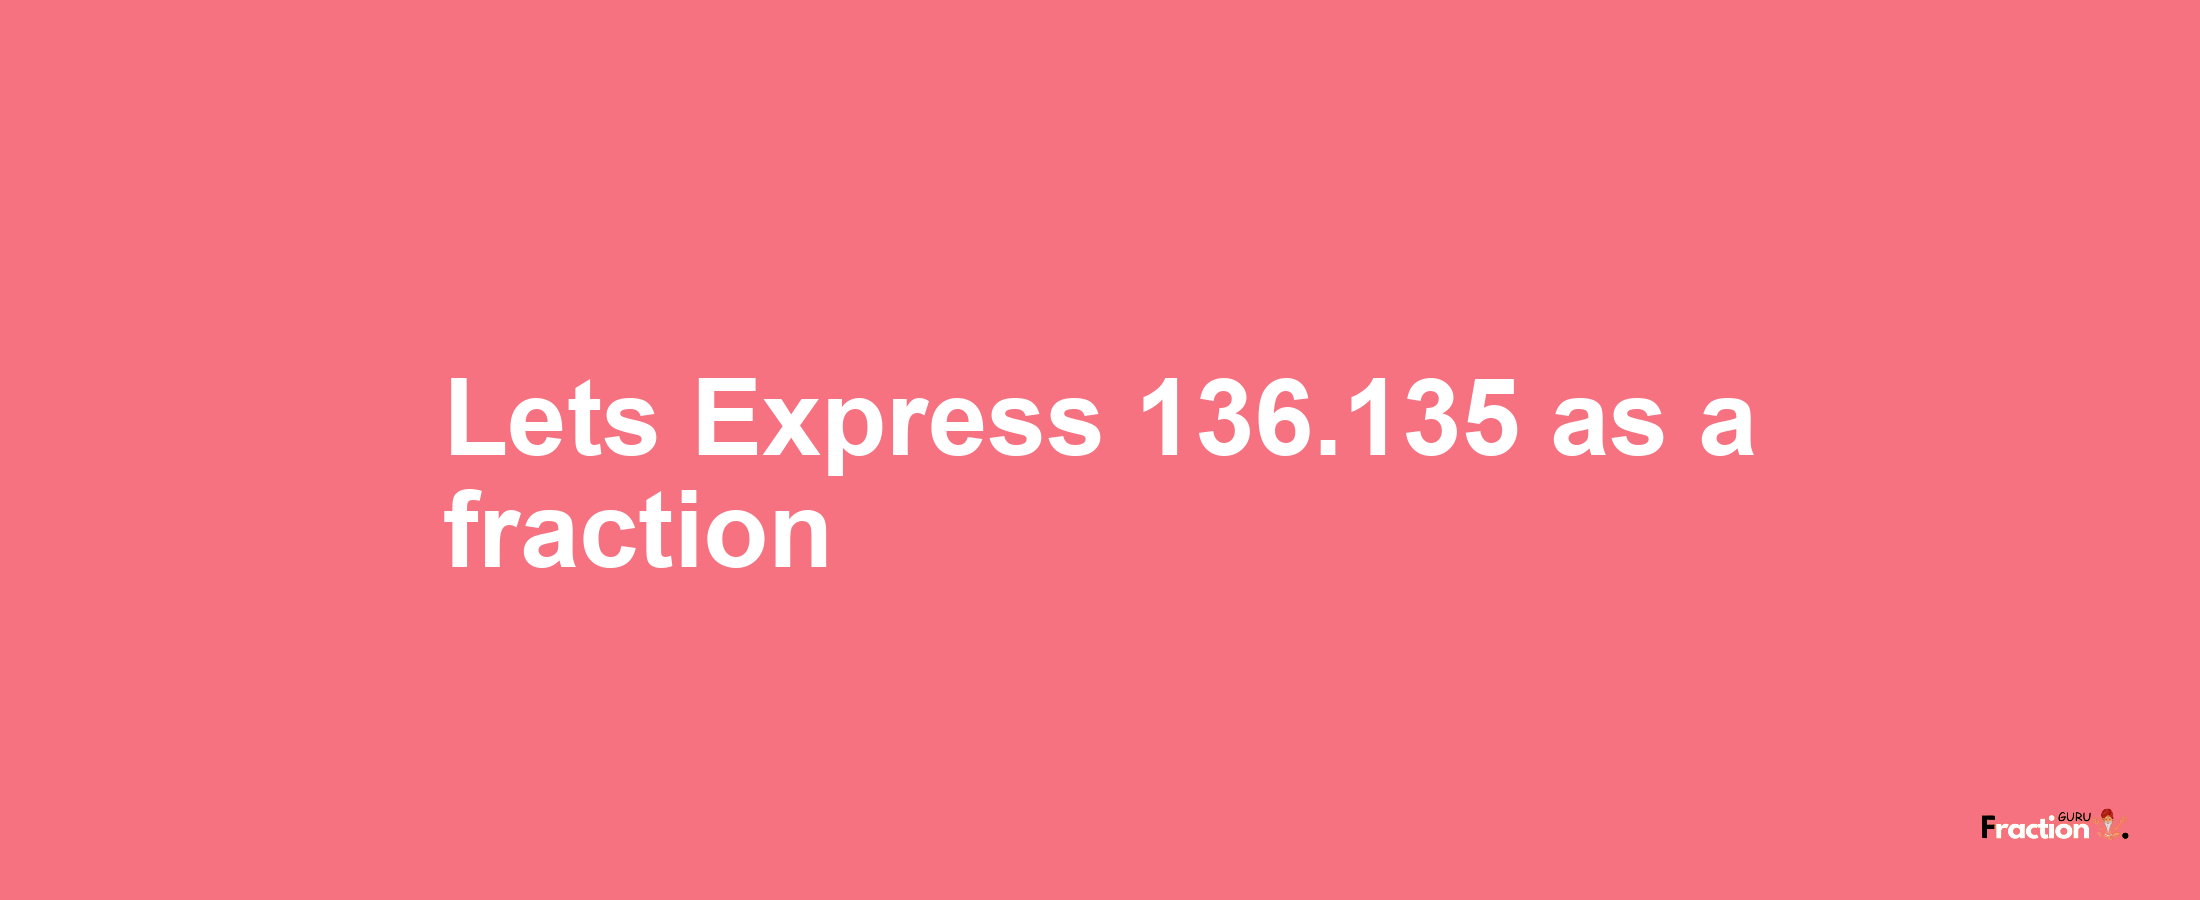 Lets Express 136.135 as afraction